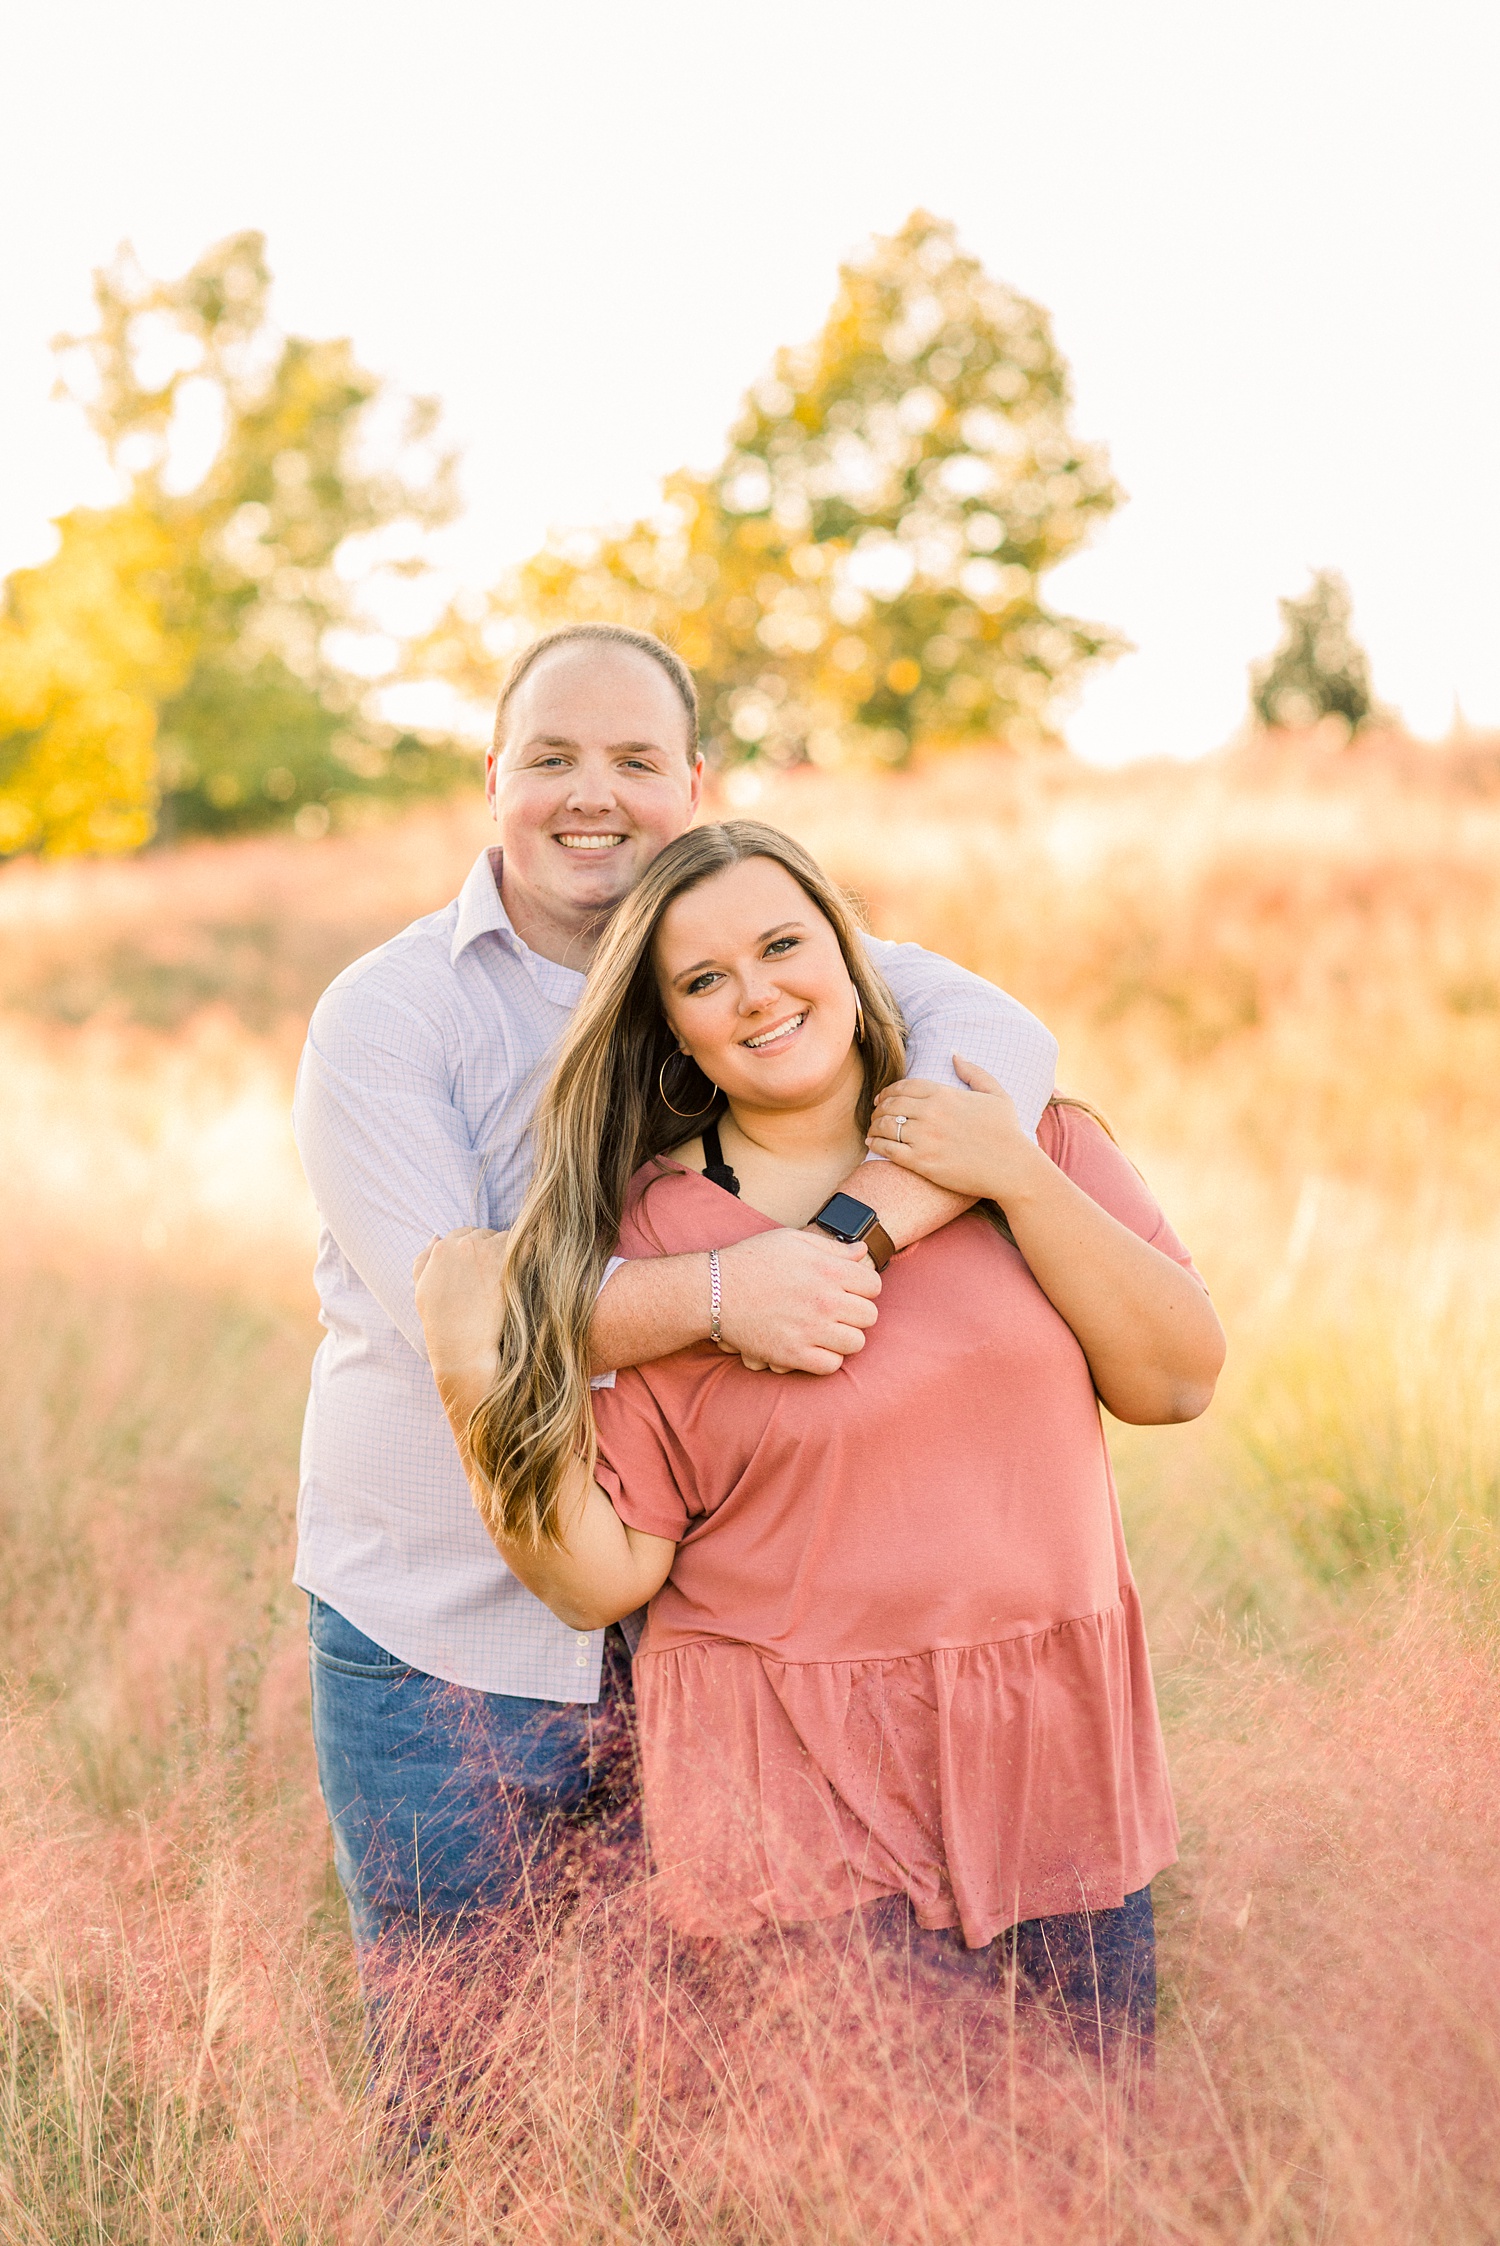 Alabama engagement portraits in field with tall grass